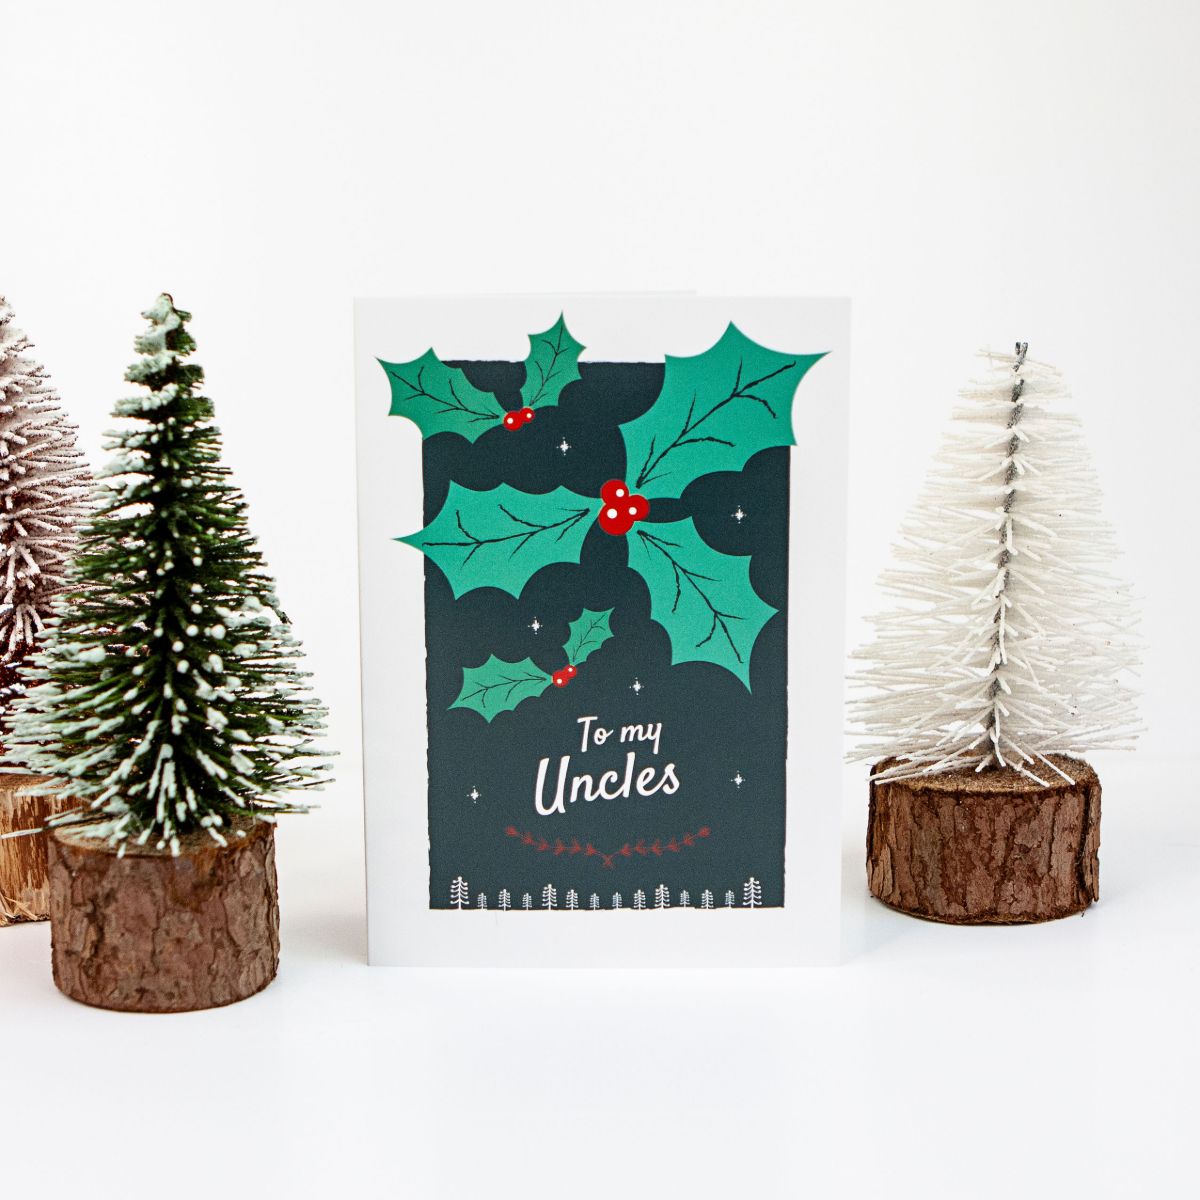 Holly Design Christmas Card for Two Uncles